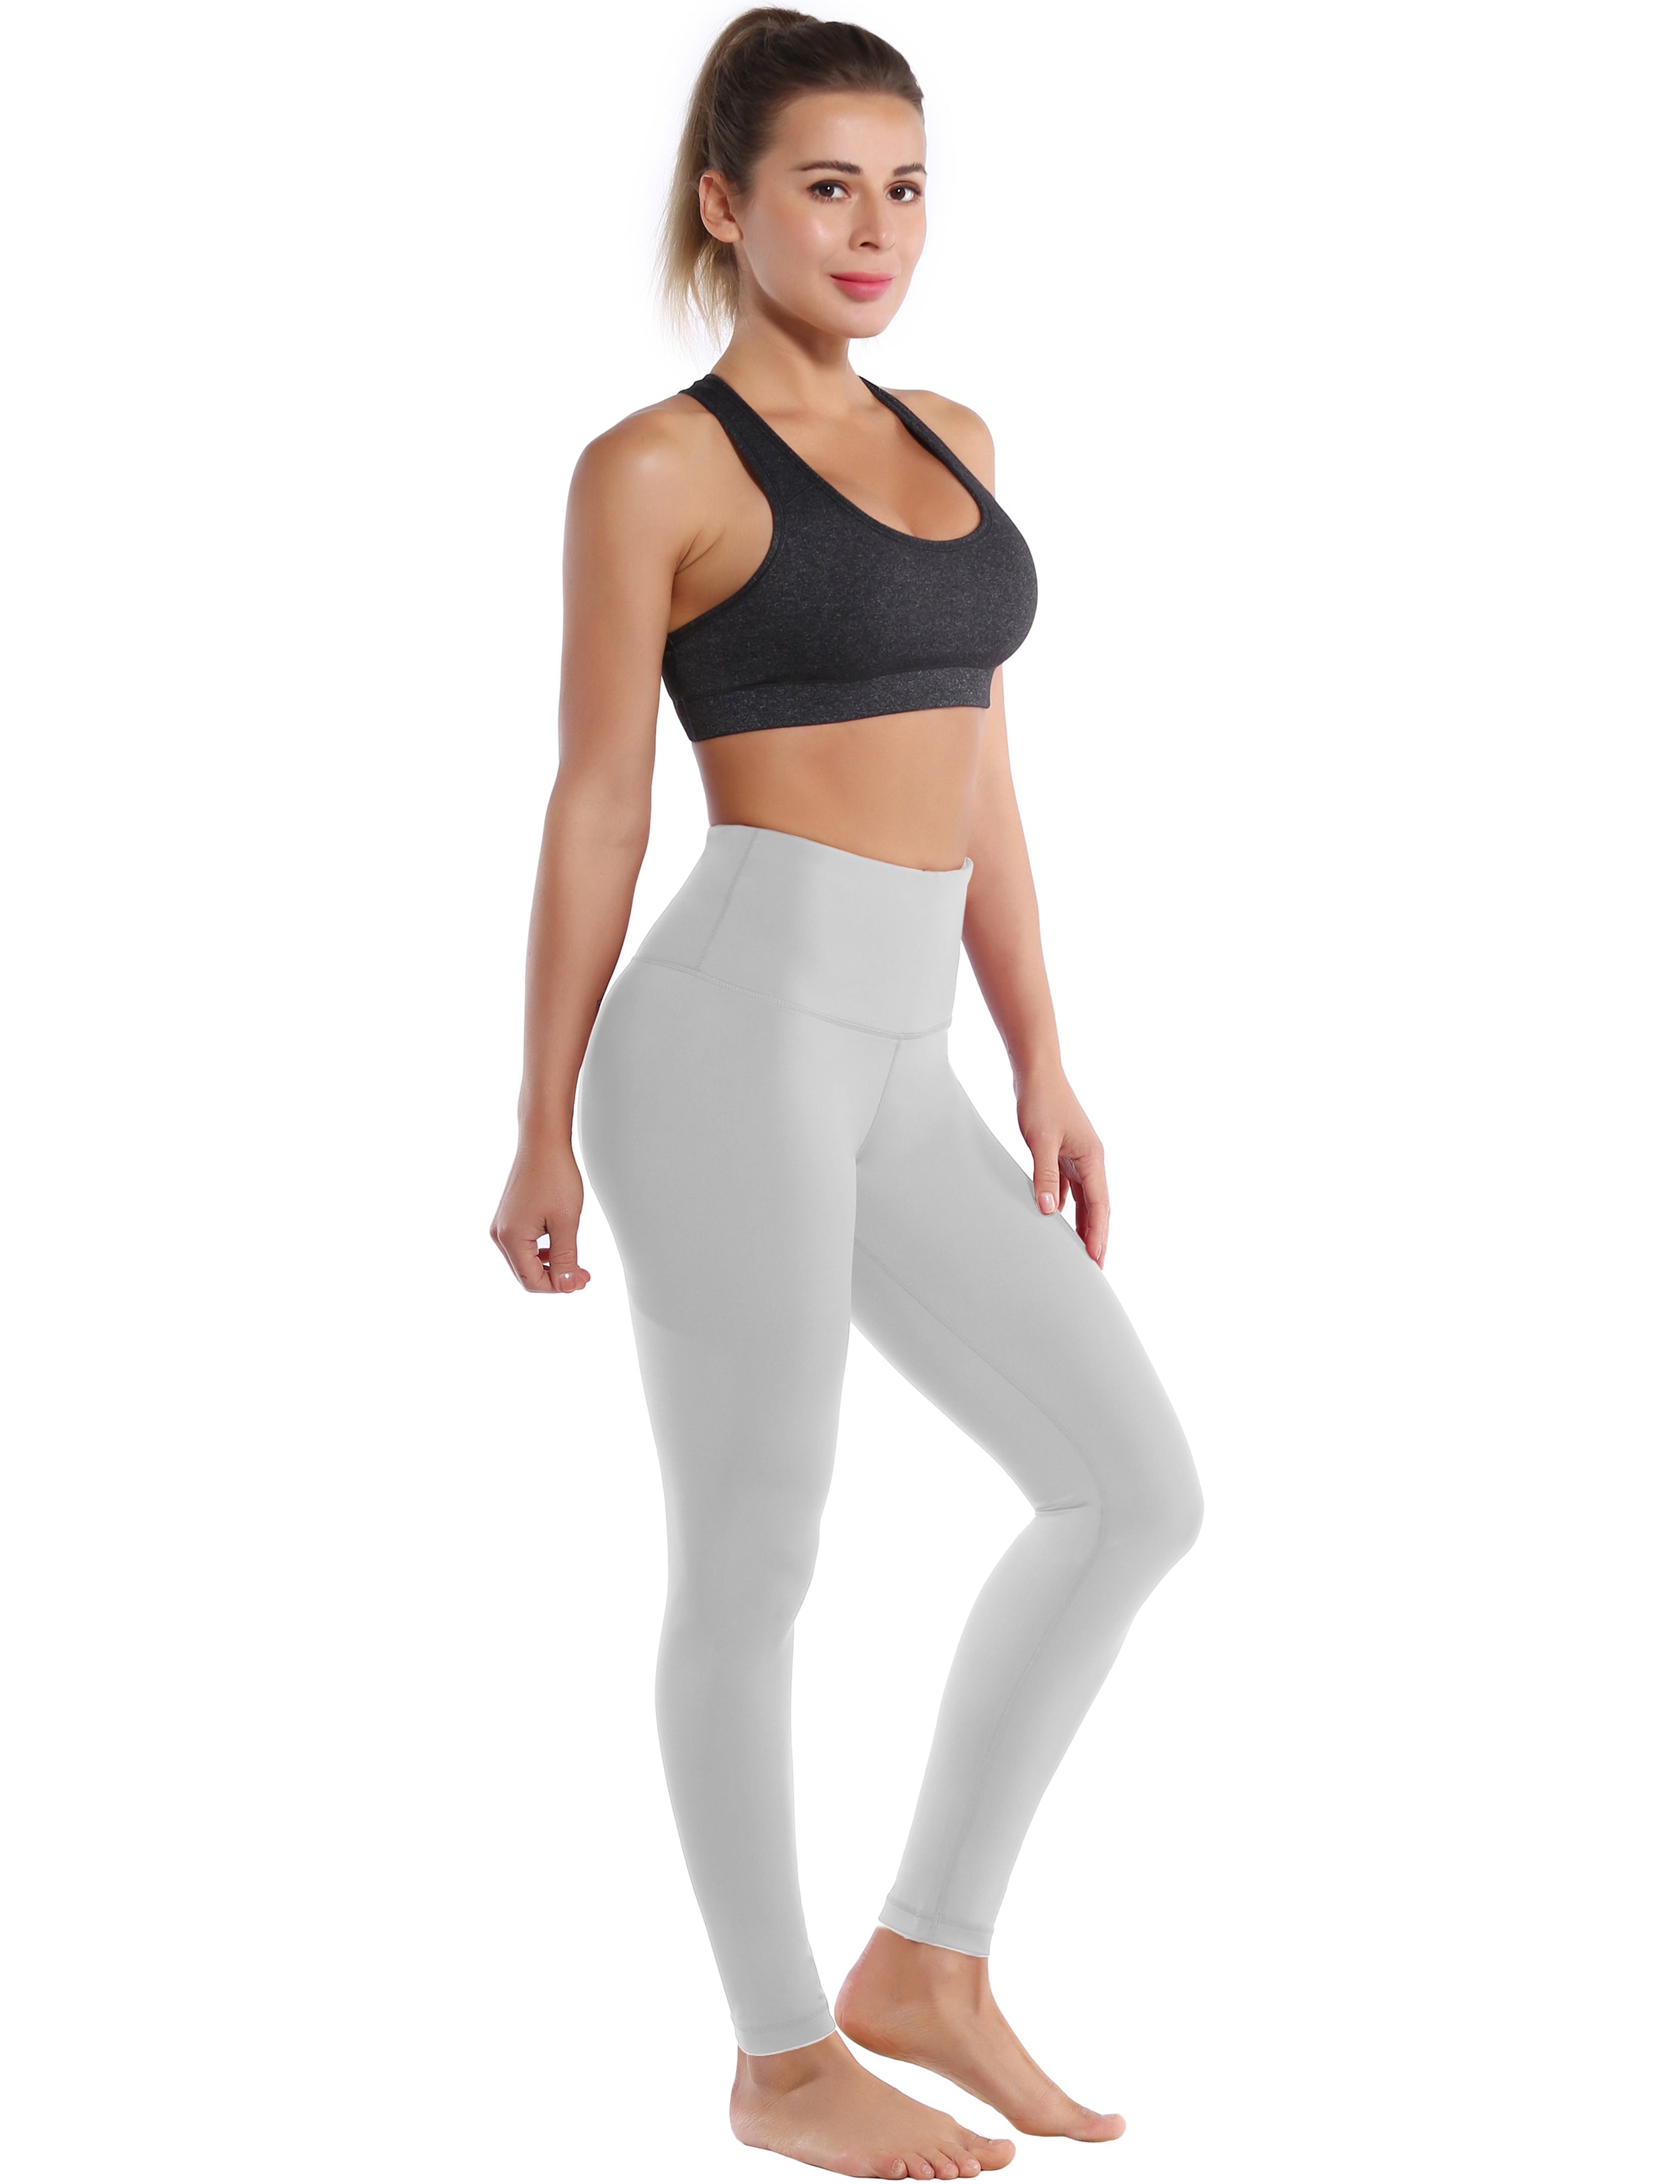 High Waist Yoga Pants lightgray 75%Nylon/25%Spandex Fabric doesn't attract lint easily 4-way stretch No see-through Moisture-wicking Tummy control Inner pocket Four lengths